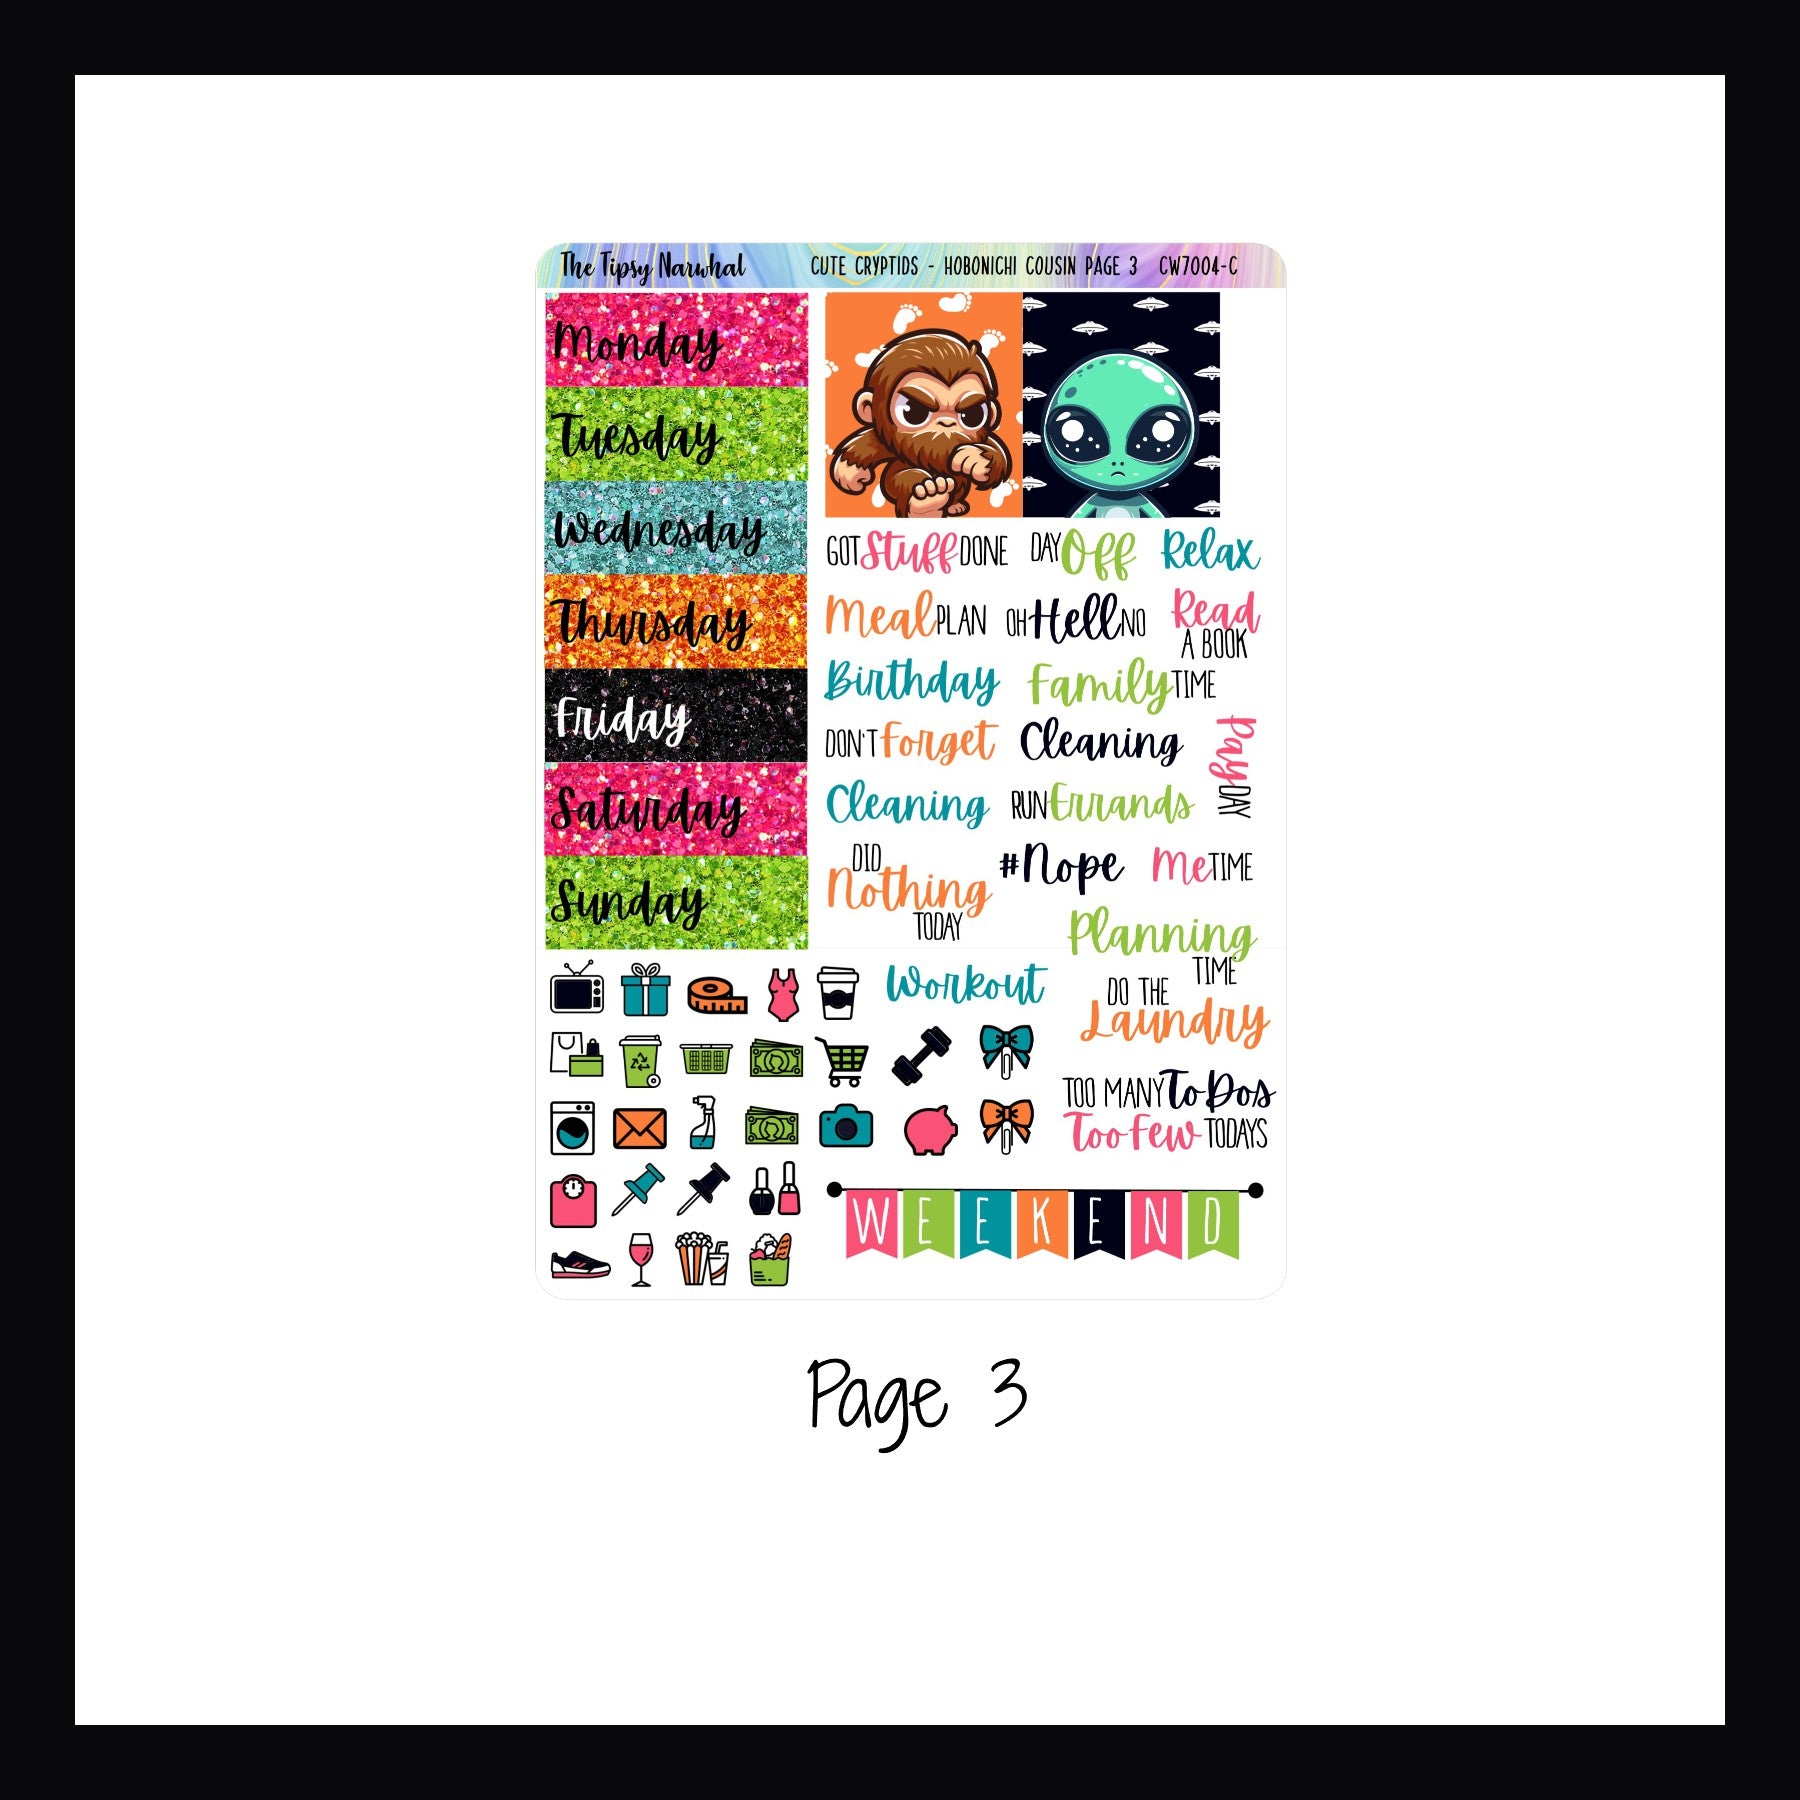 The Digital Cute Cryptids Hobonichi Cousin Kit page 3 features more date covers, weekend banner, daily icons and script stickers. 